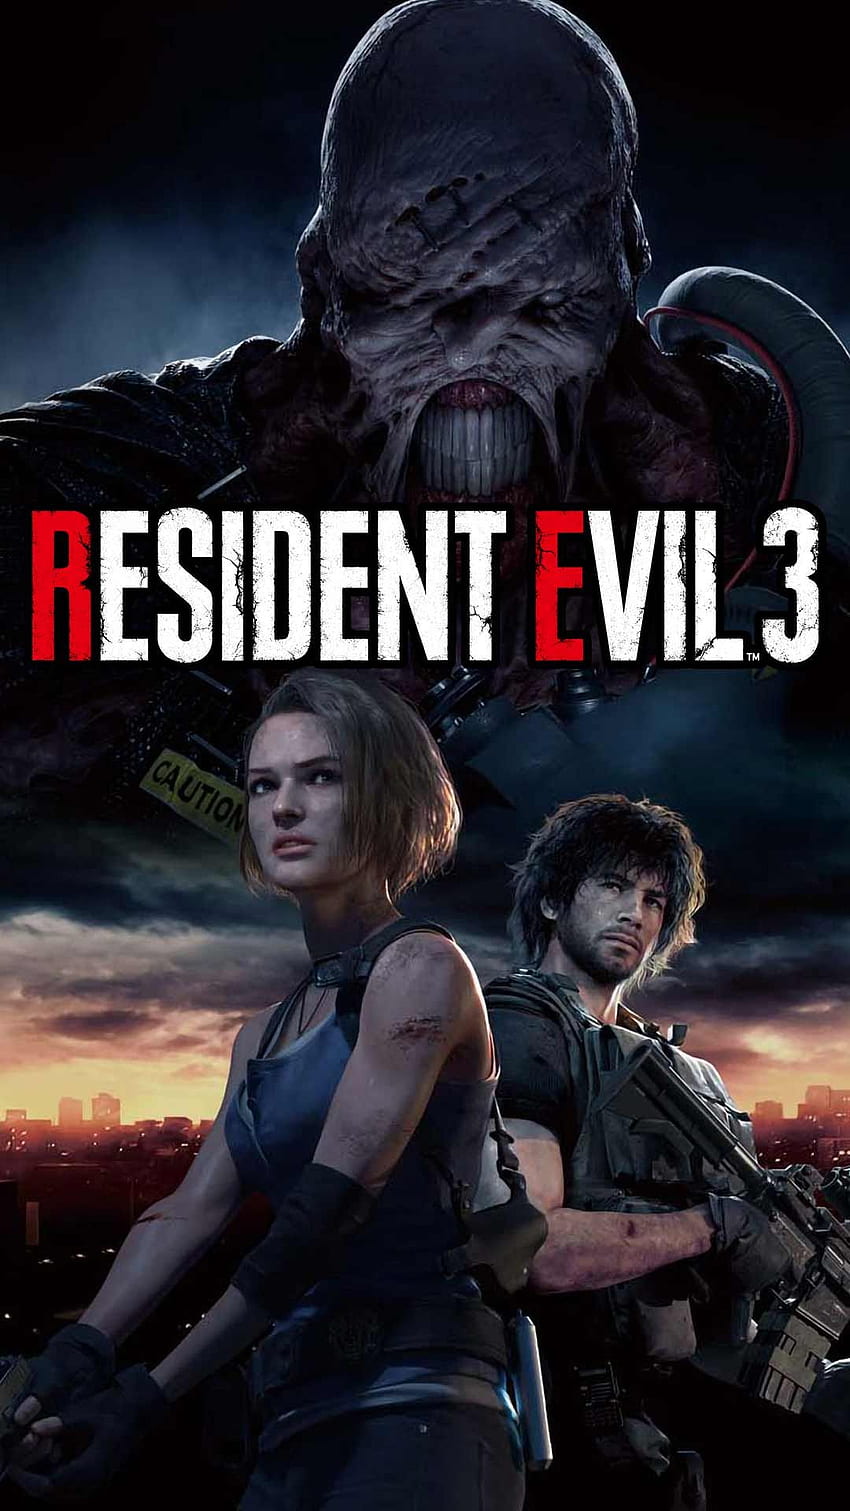 Resident evil 3 remake phone background 2020 PS4 game art Poster on iPhone android. Resident evil 3 remake, Resident evil, Resident evil game, Resident Evil 3 Phone HD phone wallpaper